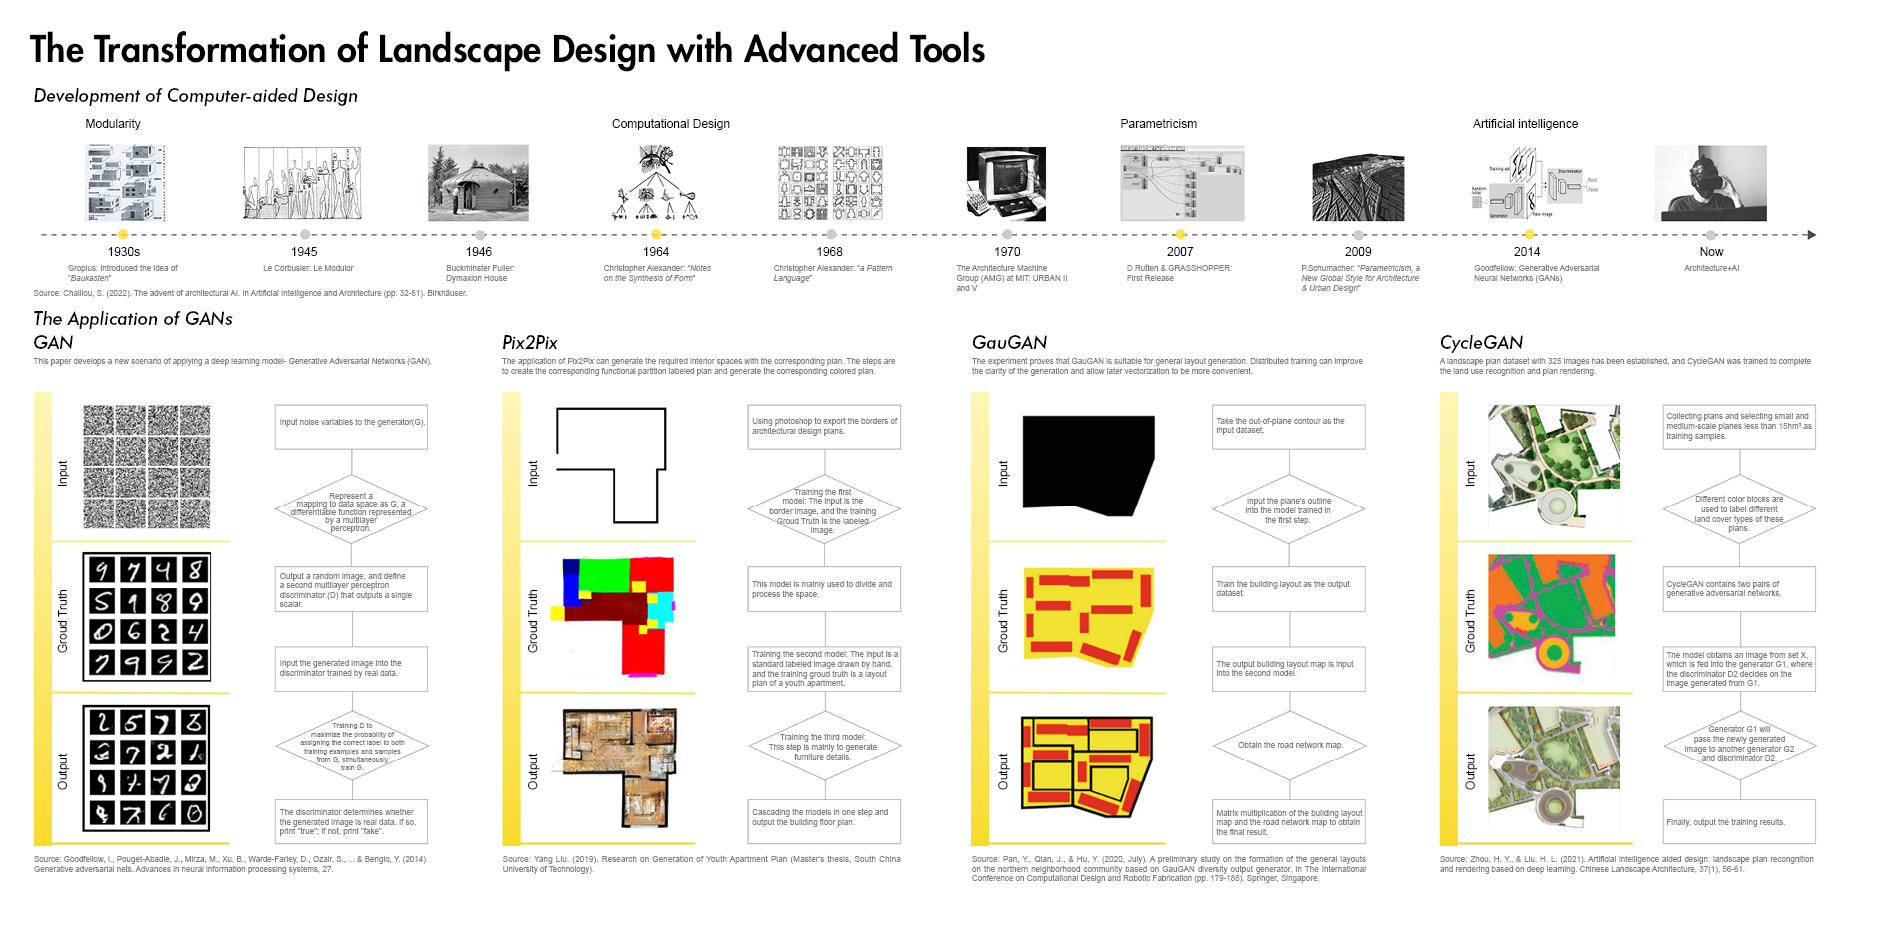 The Transformation of Landscape Design with Advanced Tools